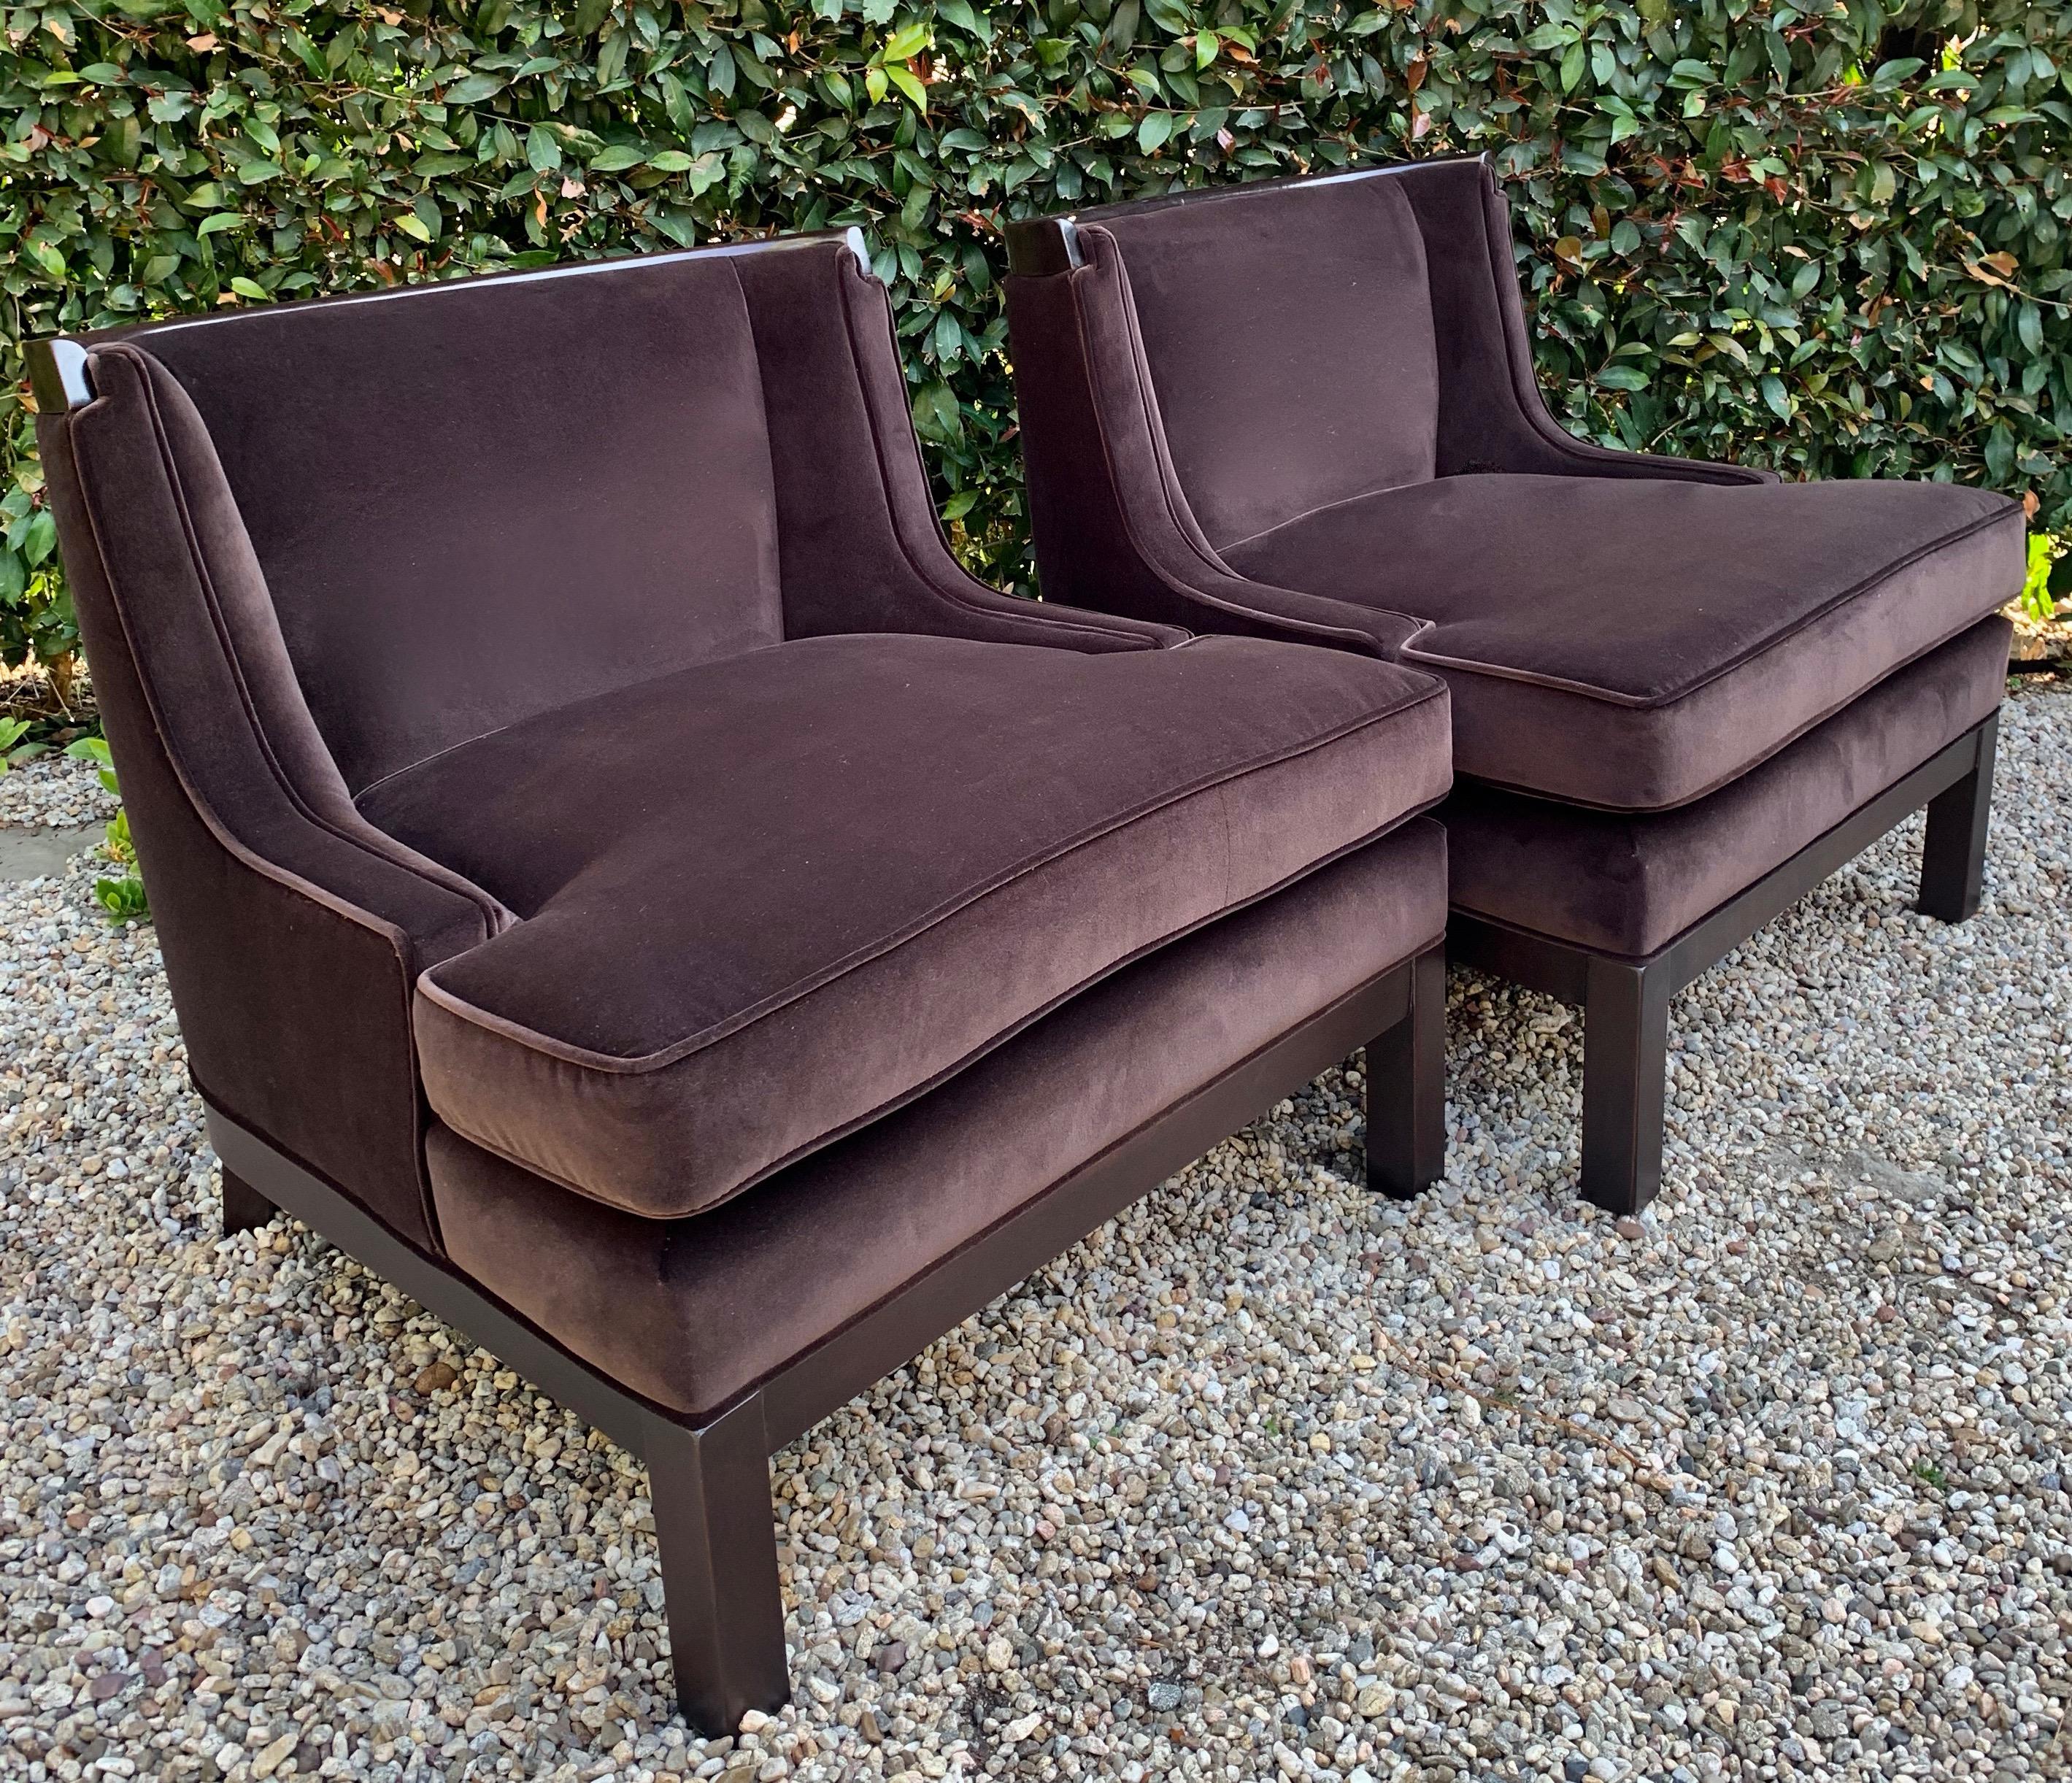 20th Century Pair of Tomlinson Style Chairs in Brown Mohair